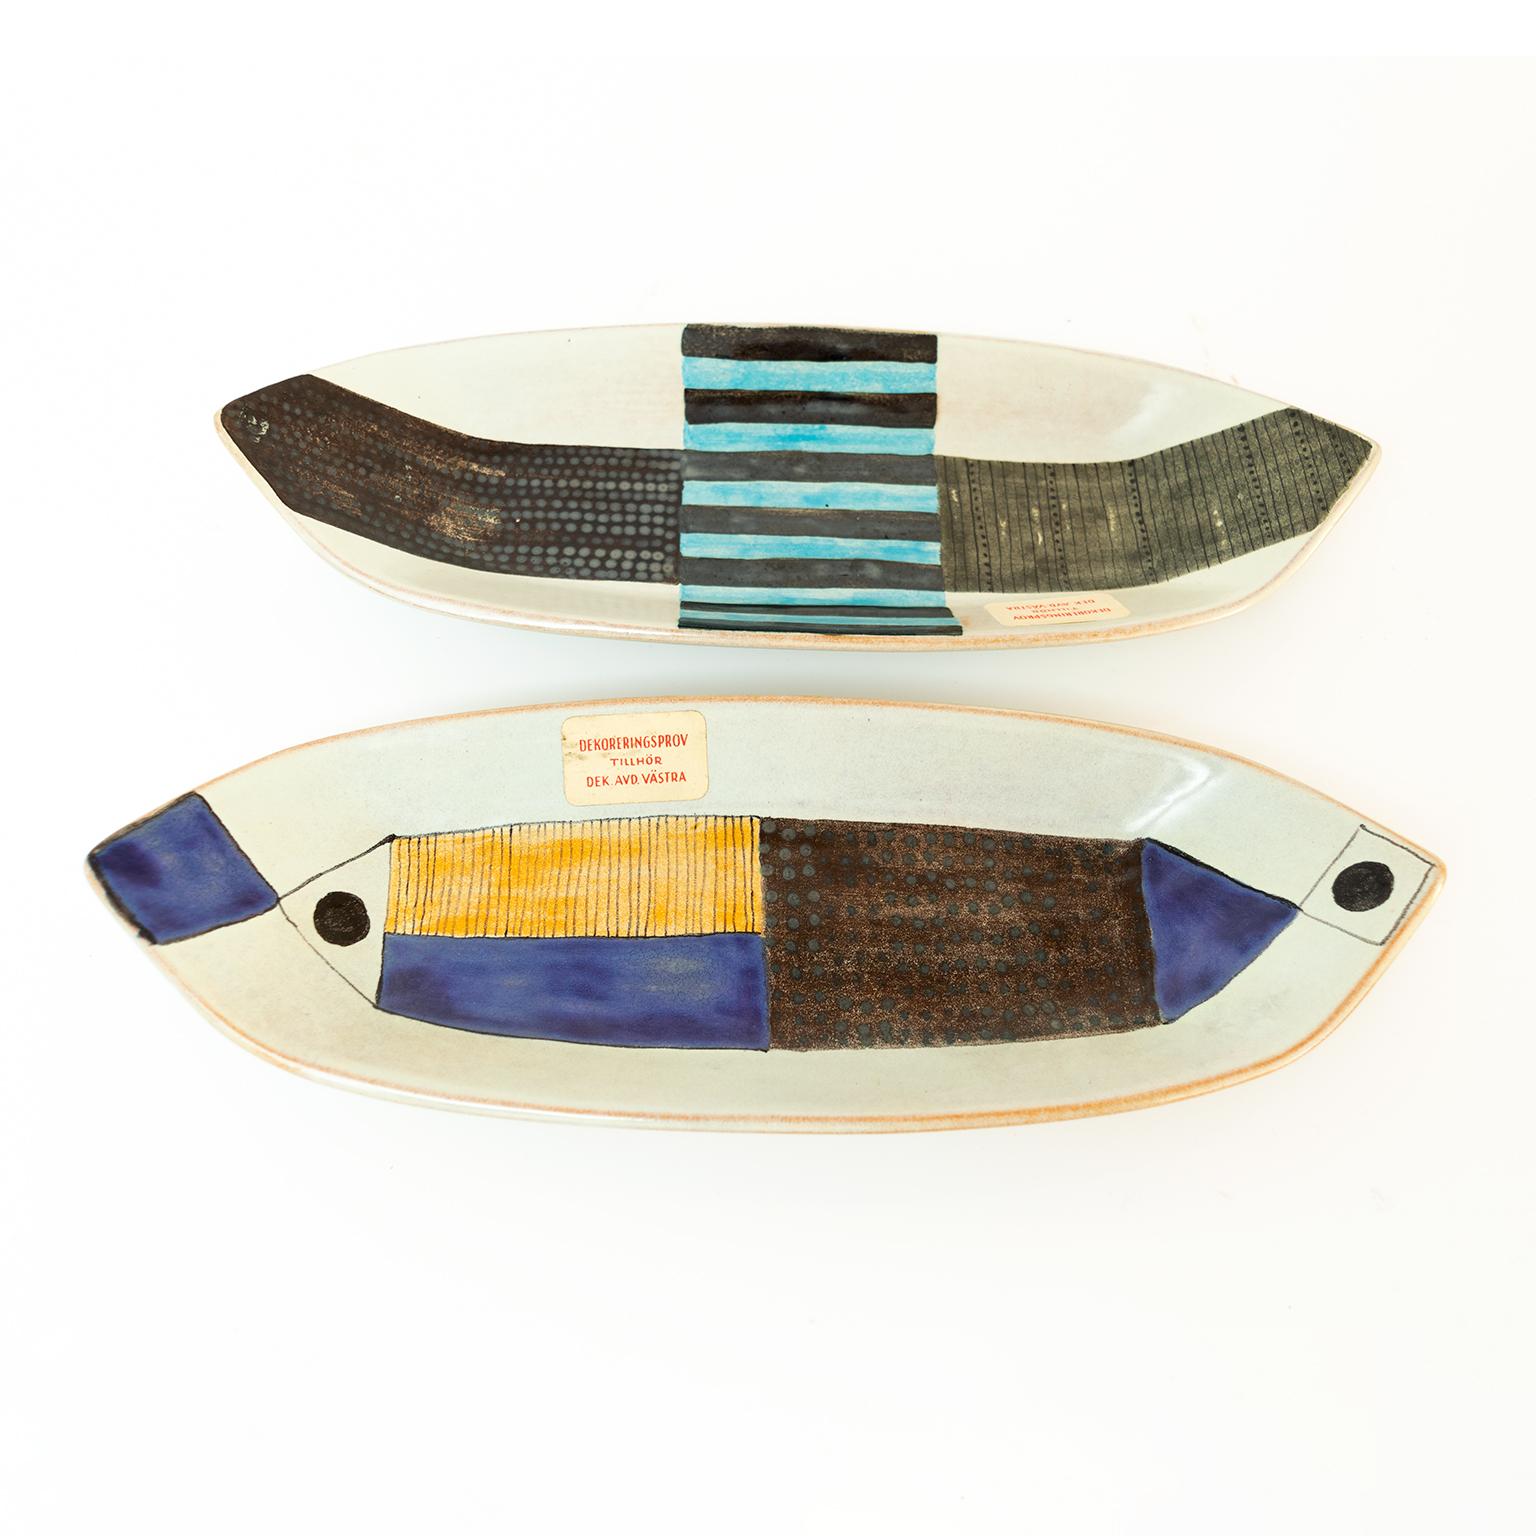 Two Scandinavian modern ceramic dishes with hand decorated geometric patterns. These dishes are from a collaboration series by Carl Harry Stålhane and Aune Laukkanen for Rörstrand, circa 1950s. 

Measures: Length 12.75“, width 4.75“, height 2“.
 